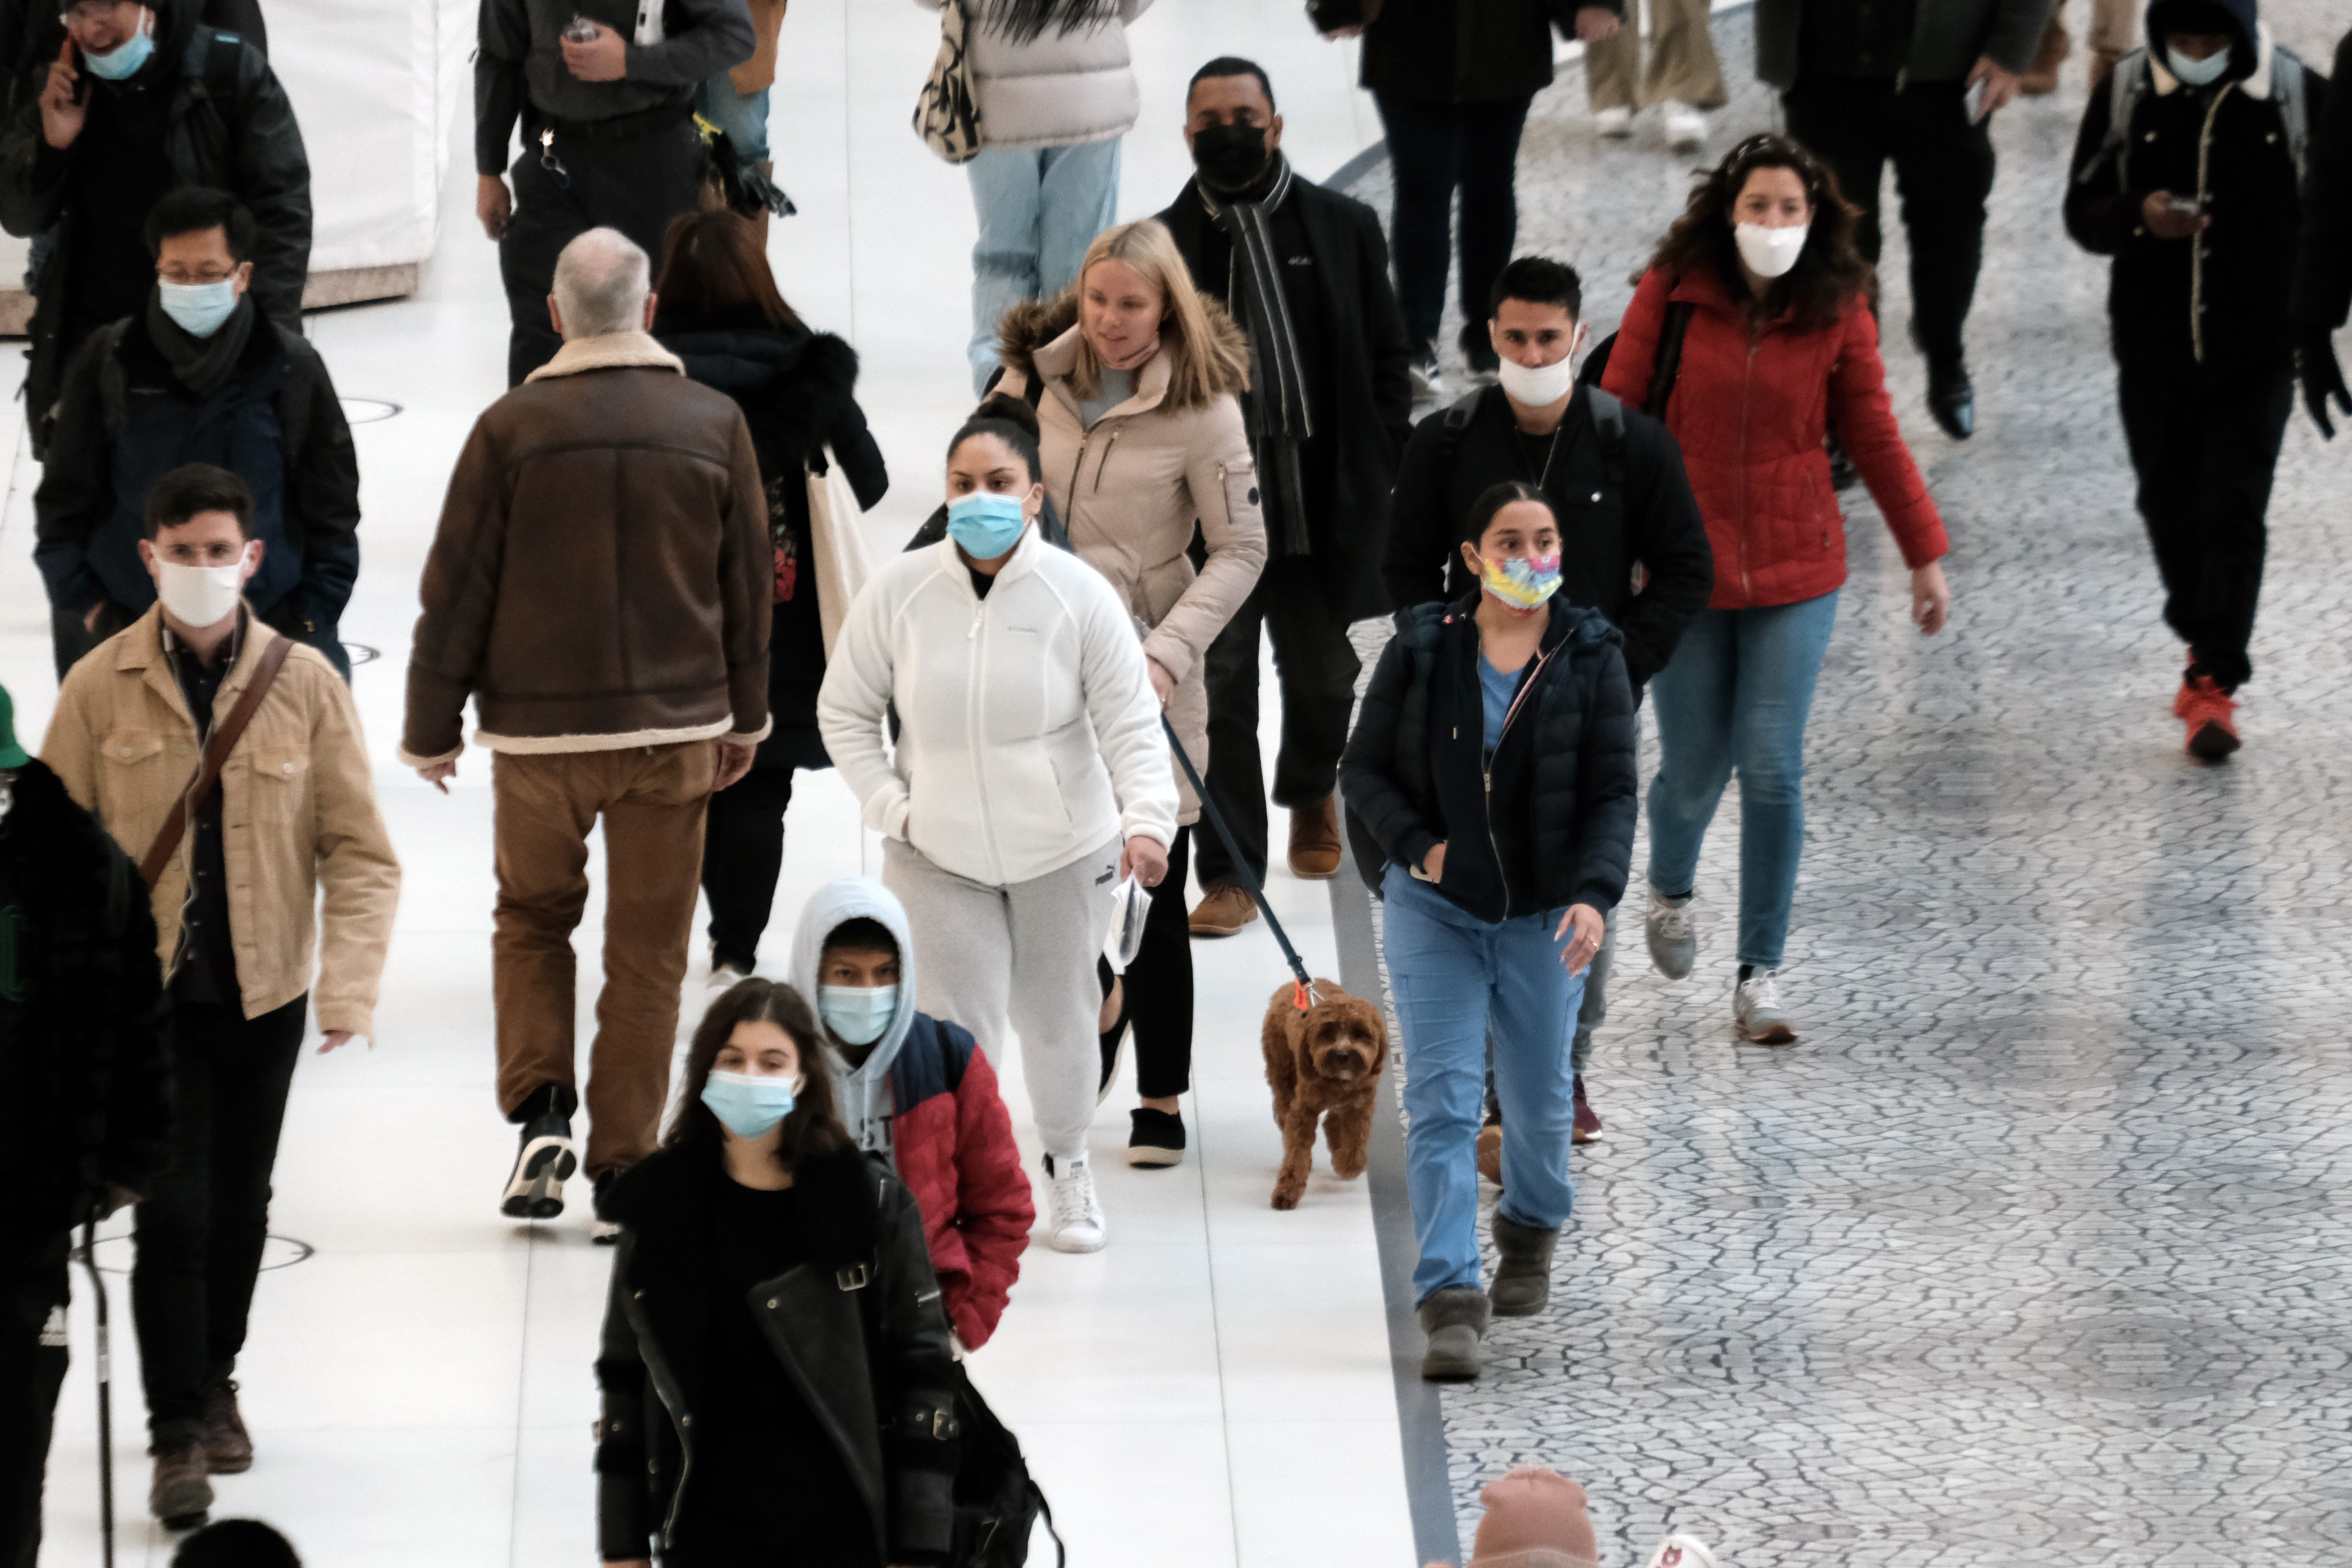 People wear masks at an indoor mall in The Oculus in lower Manhattan on the day that a mask mandate went into effect in New York on 13 December 2021 in New York City